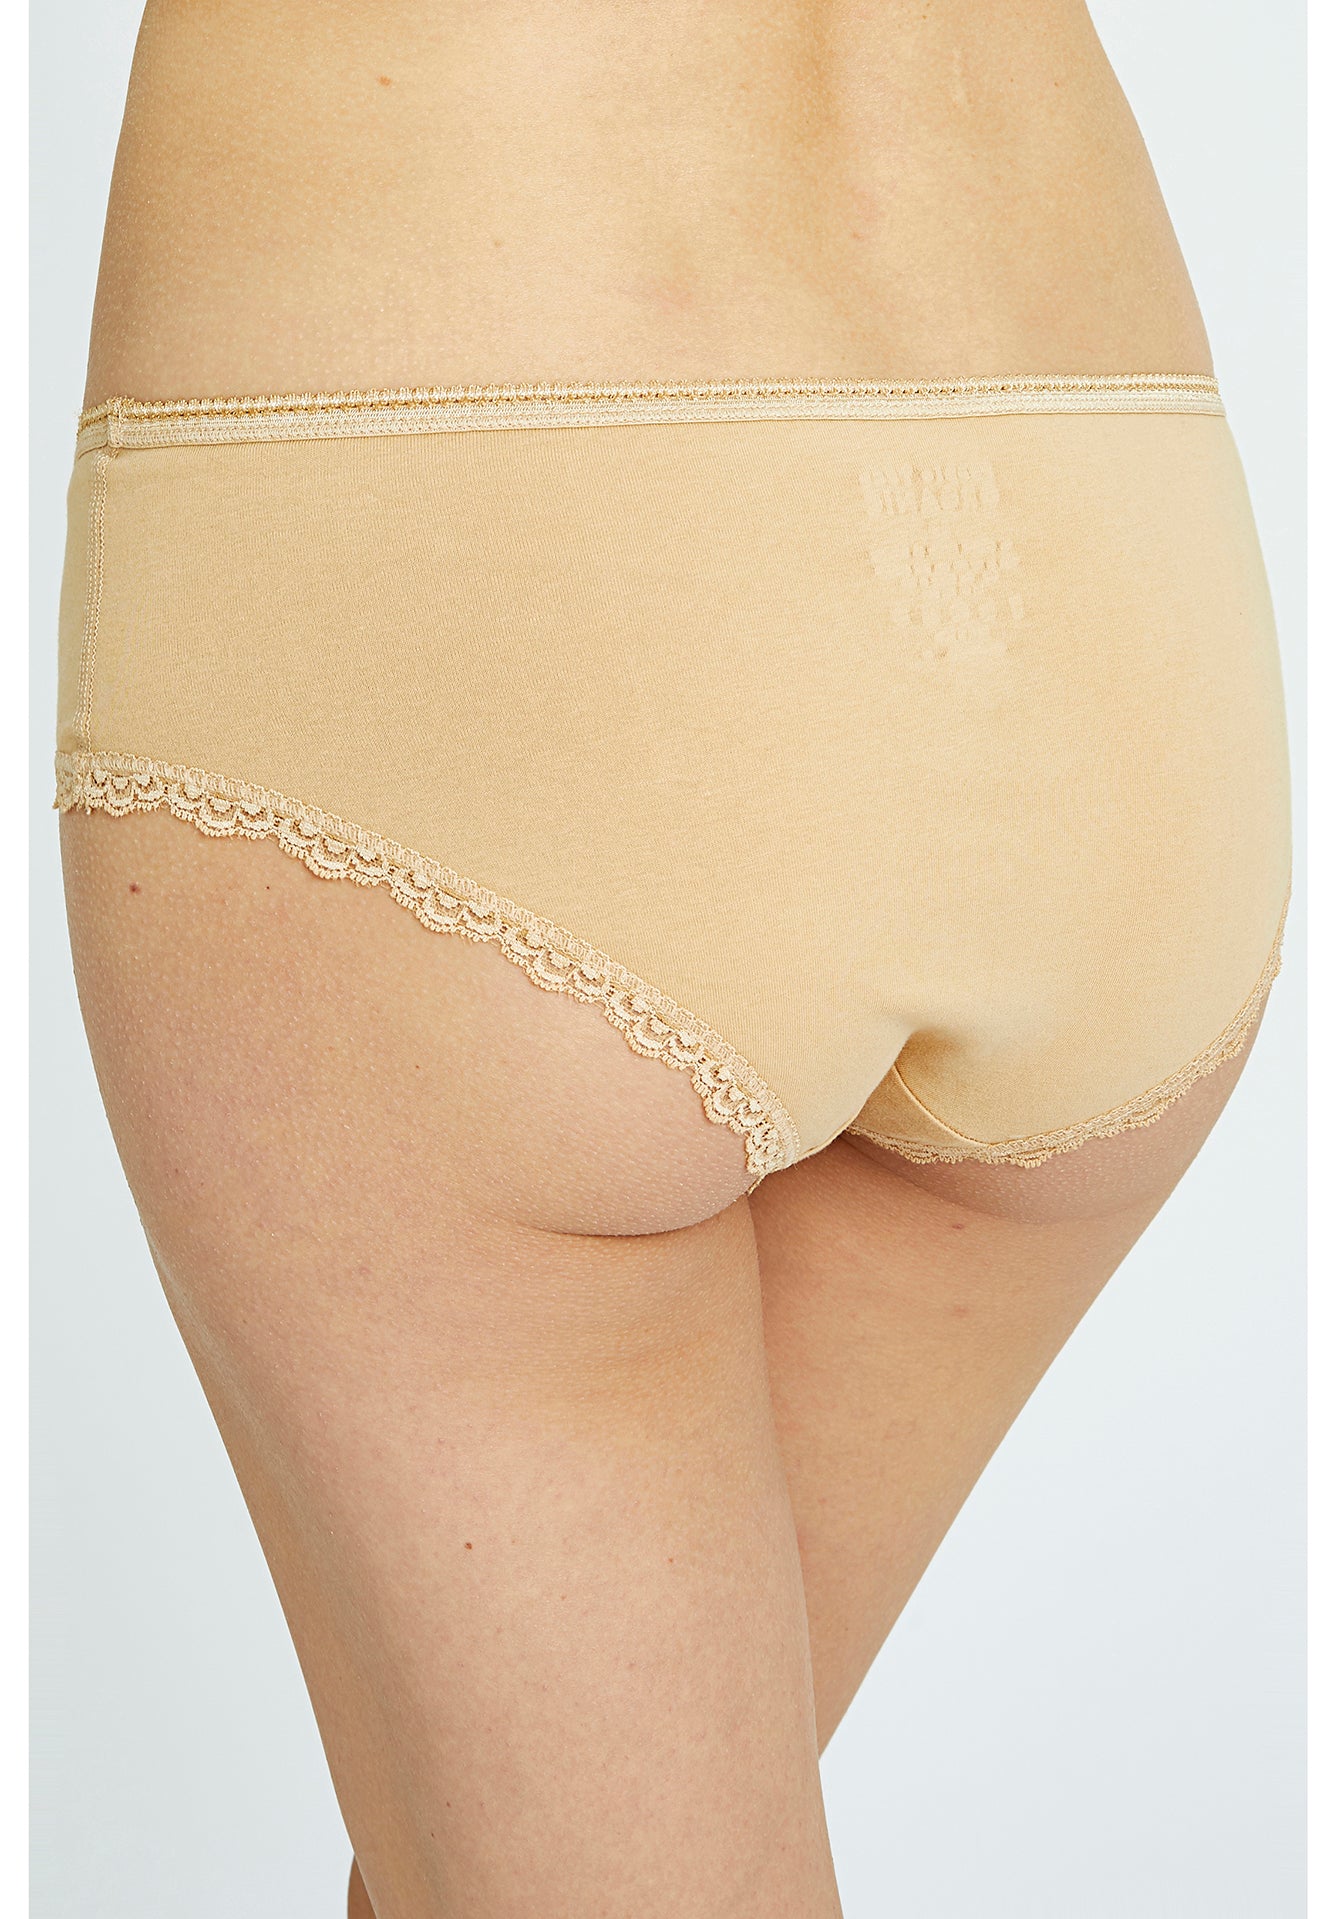 Organic Lace Hipsters - Almond